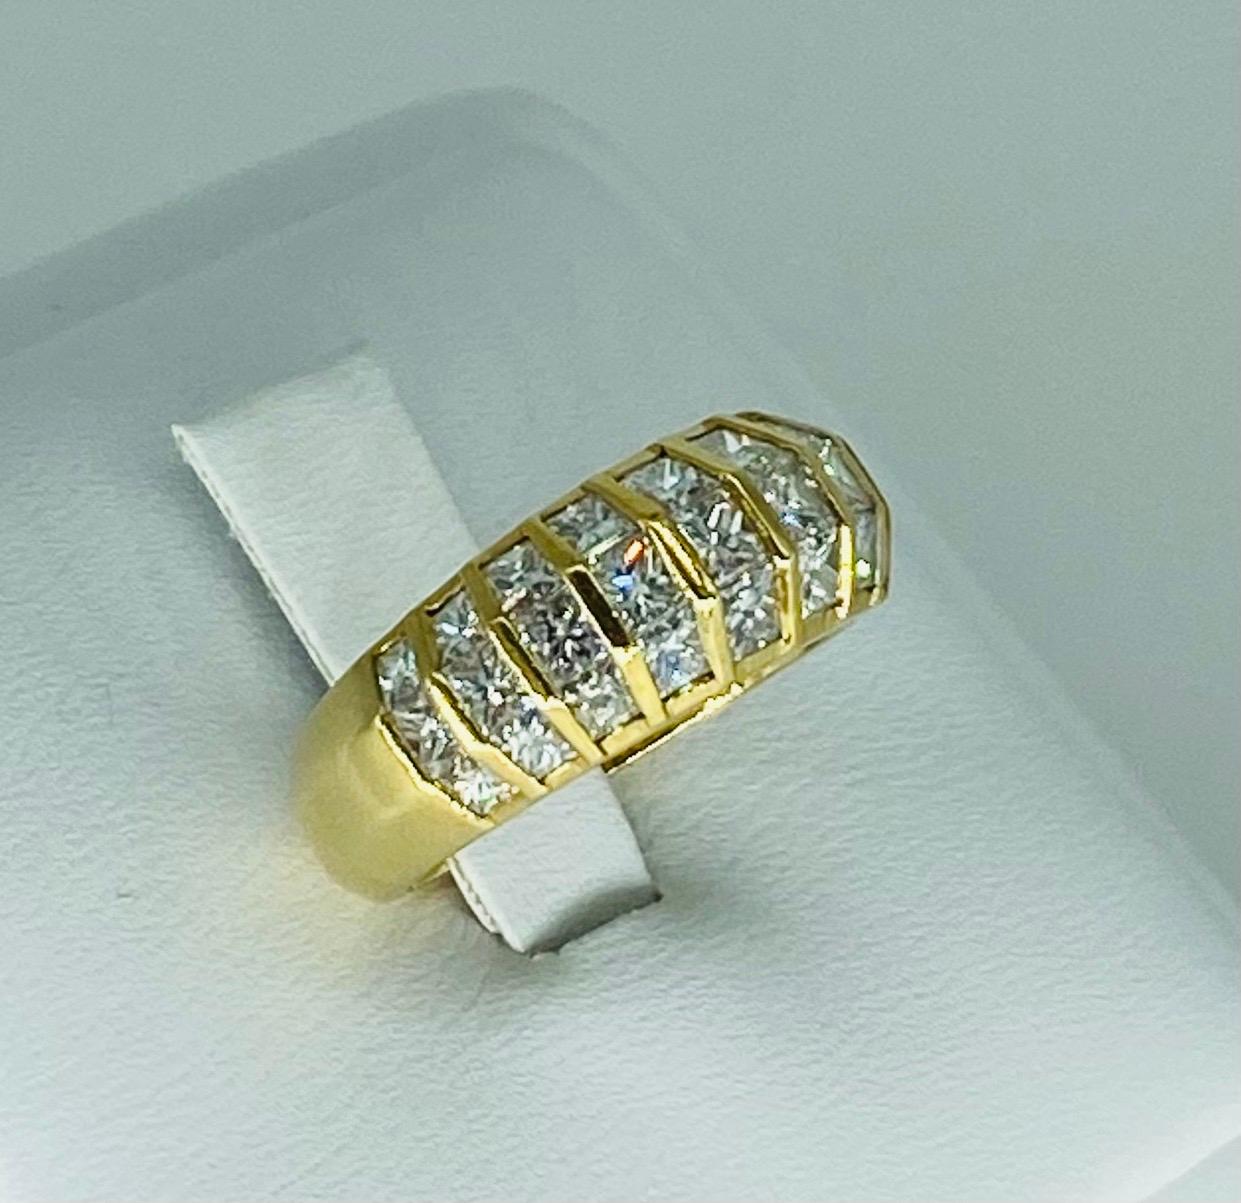 Vintage Ladies 2.50 Carat Diamonds Illusion Set Dome Ring 18k Gold In Excellent Condition For Sale In Miami, FL